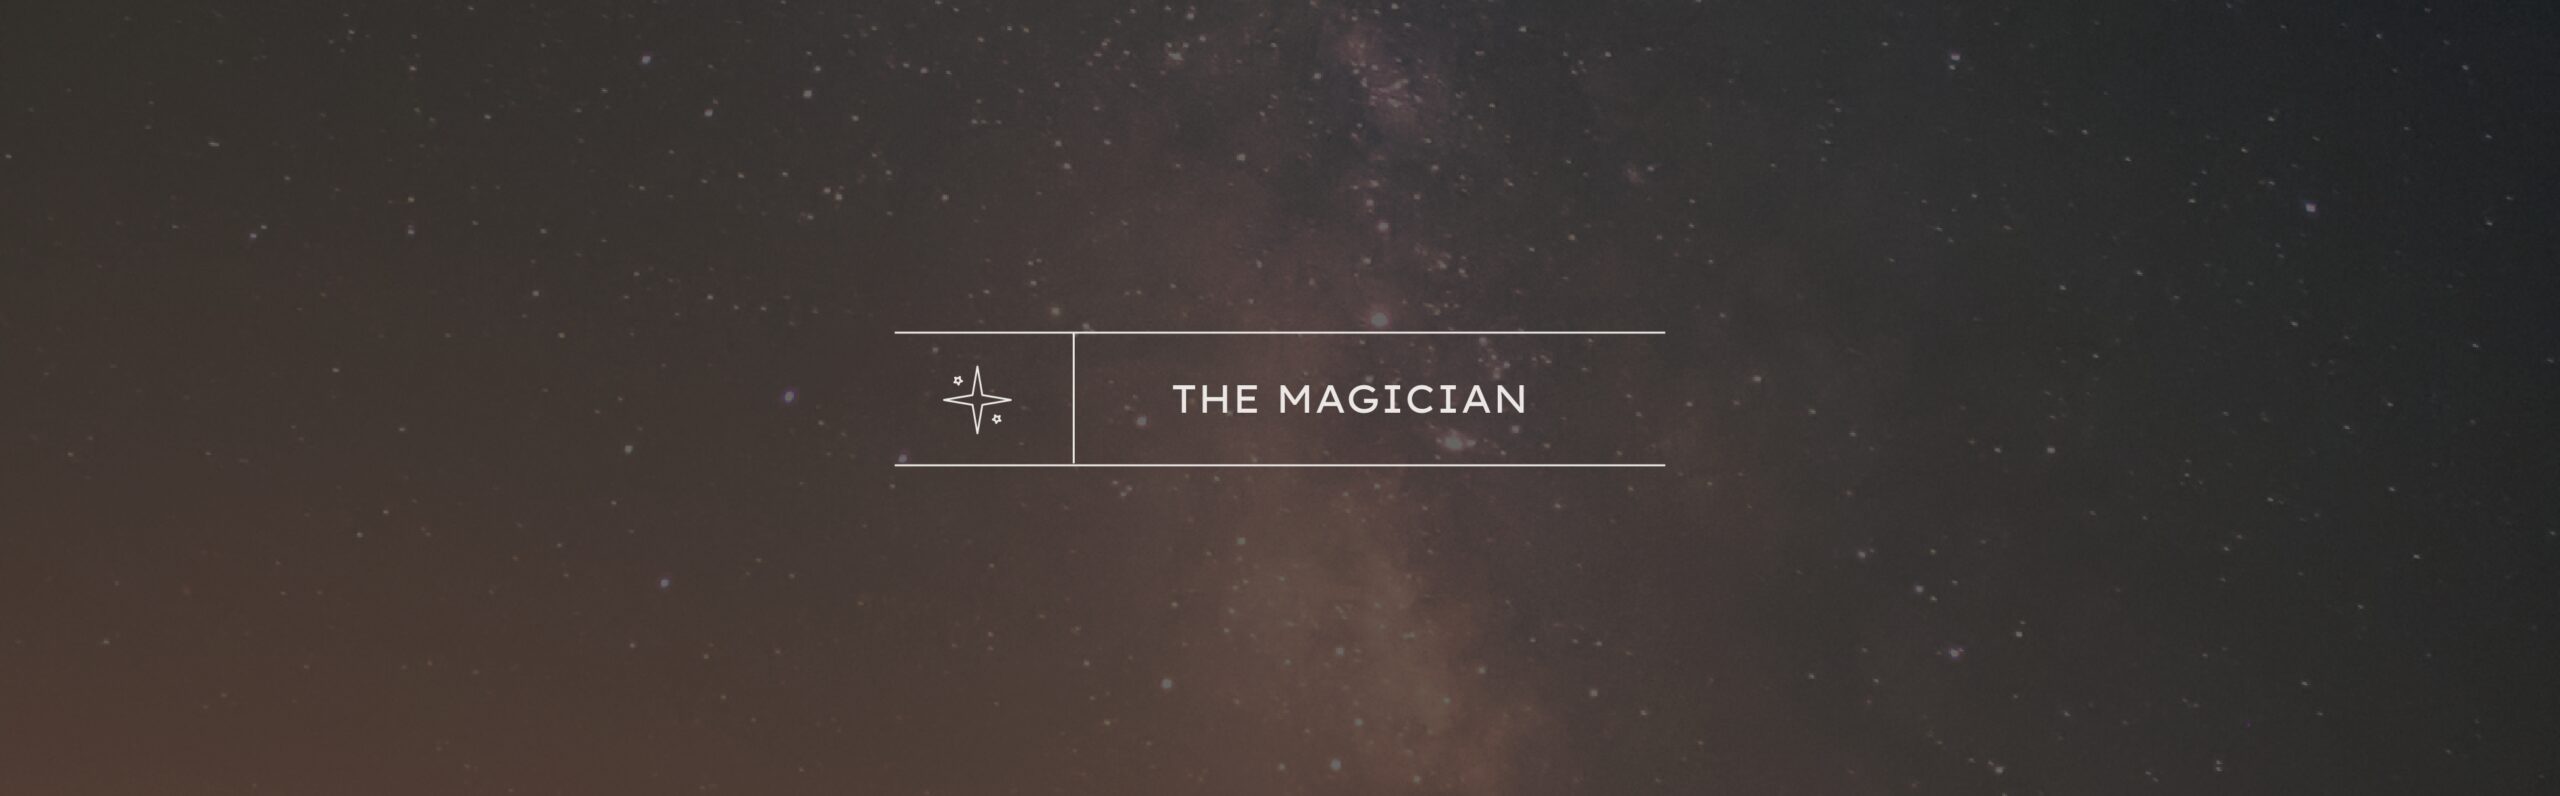 Brand Archetypes: The Magician